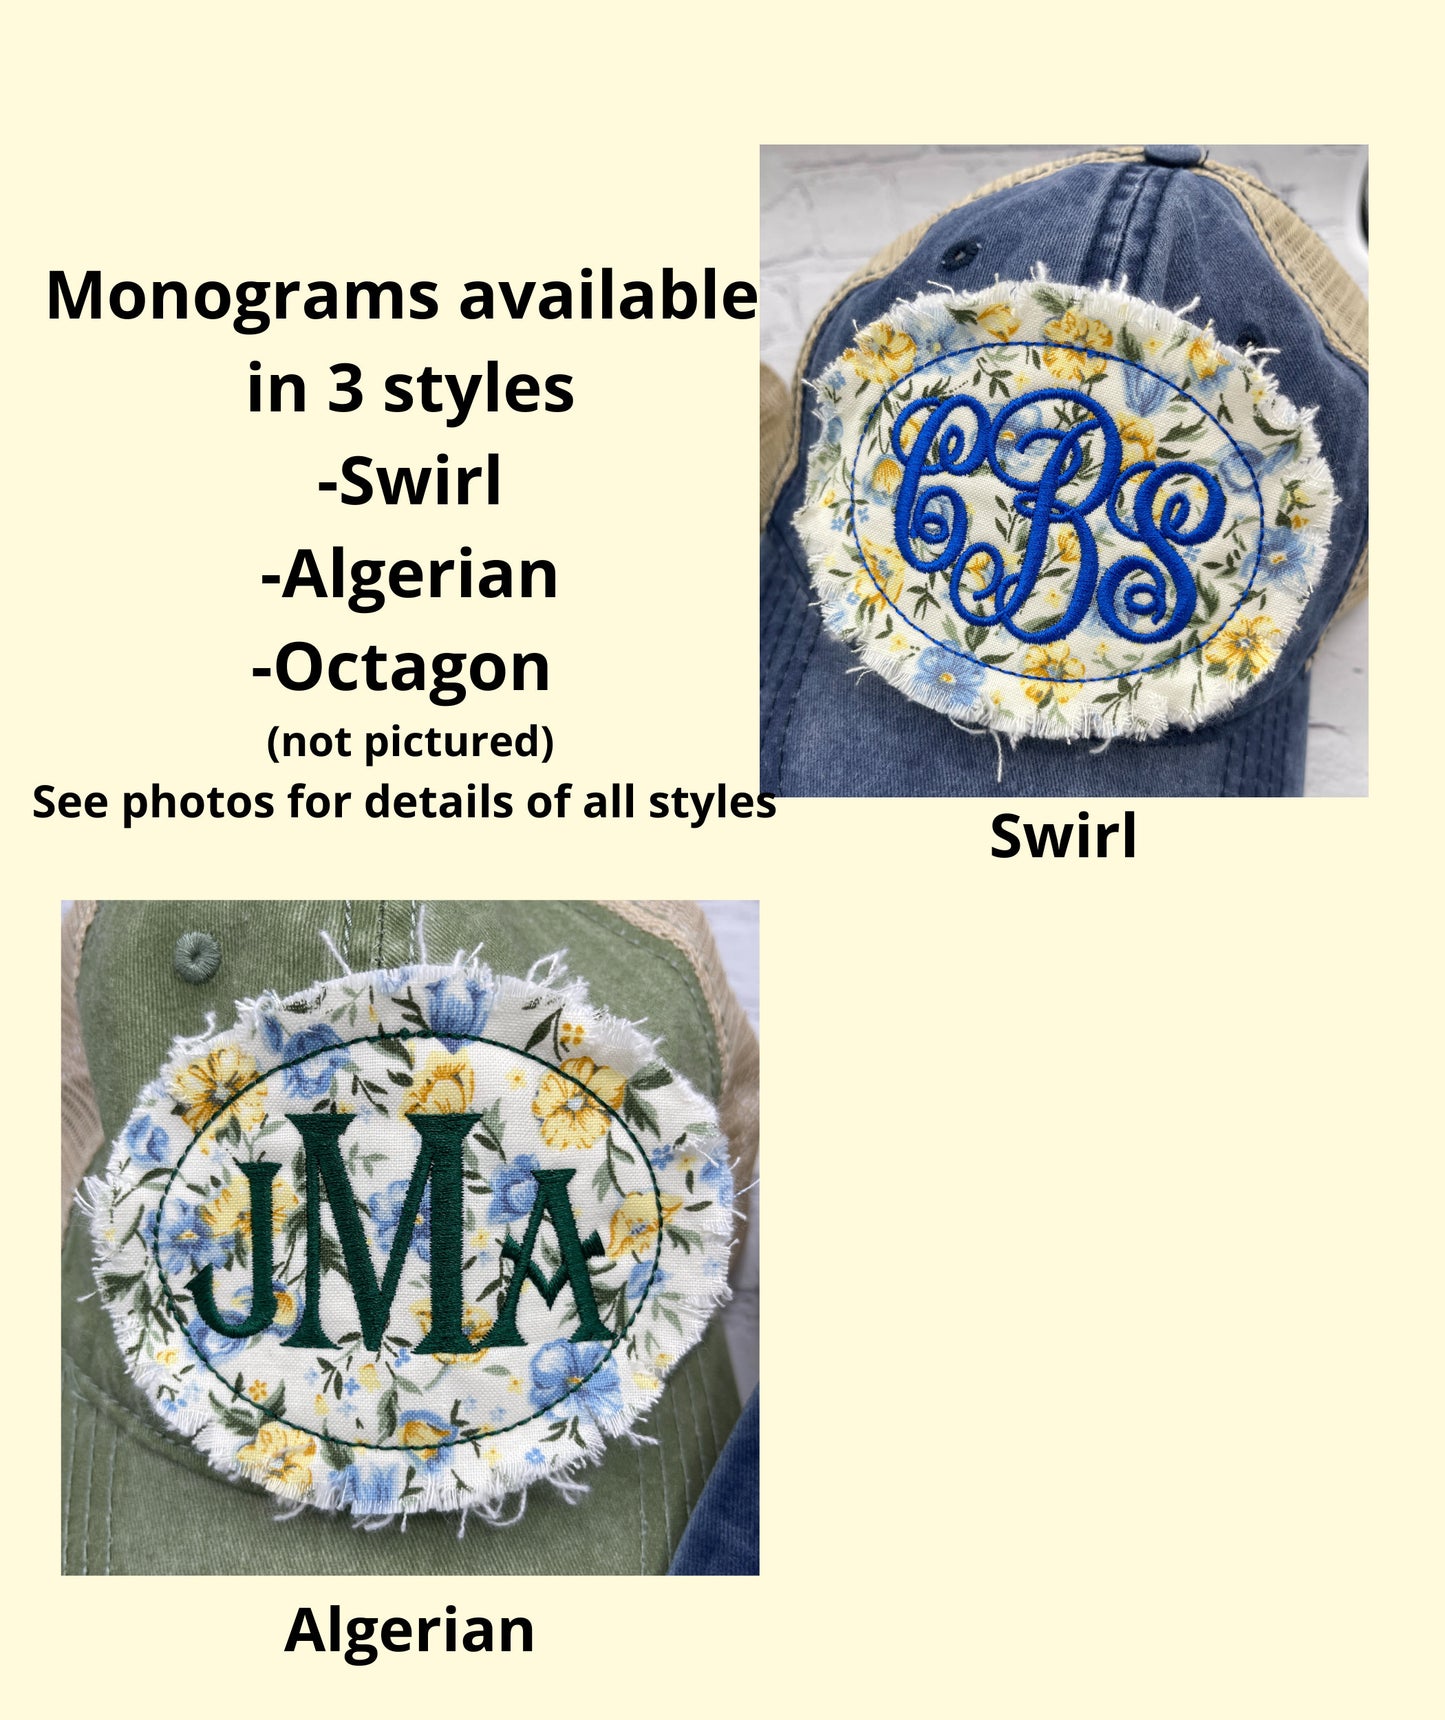 Monogram Embroidered Raggy Patch Hat